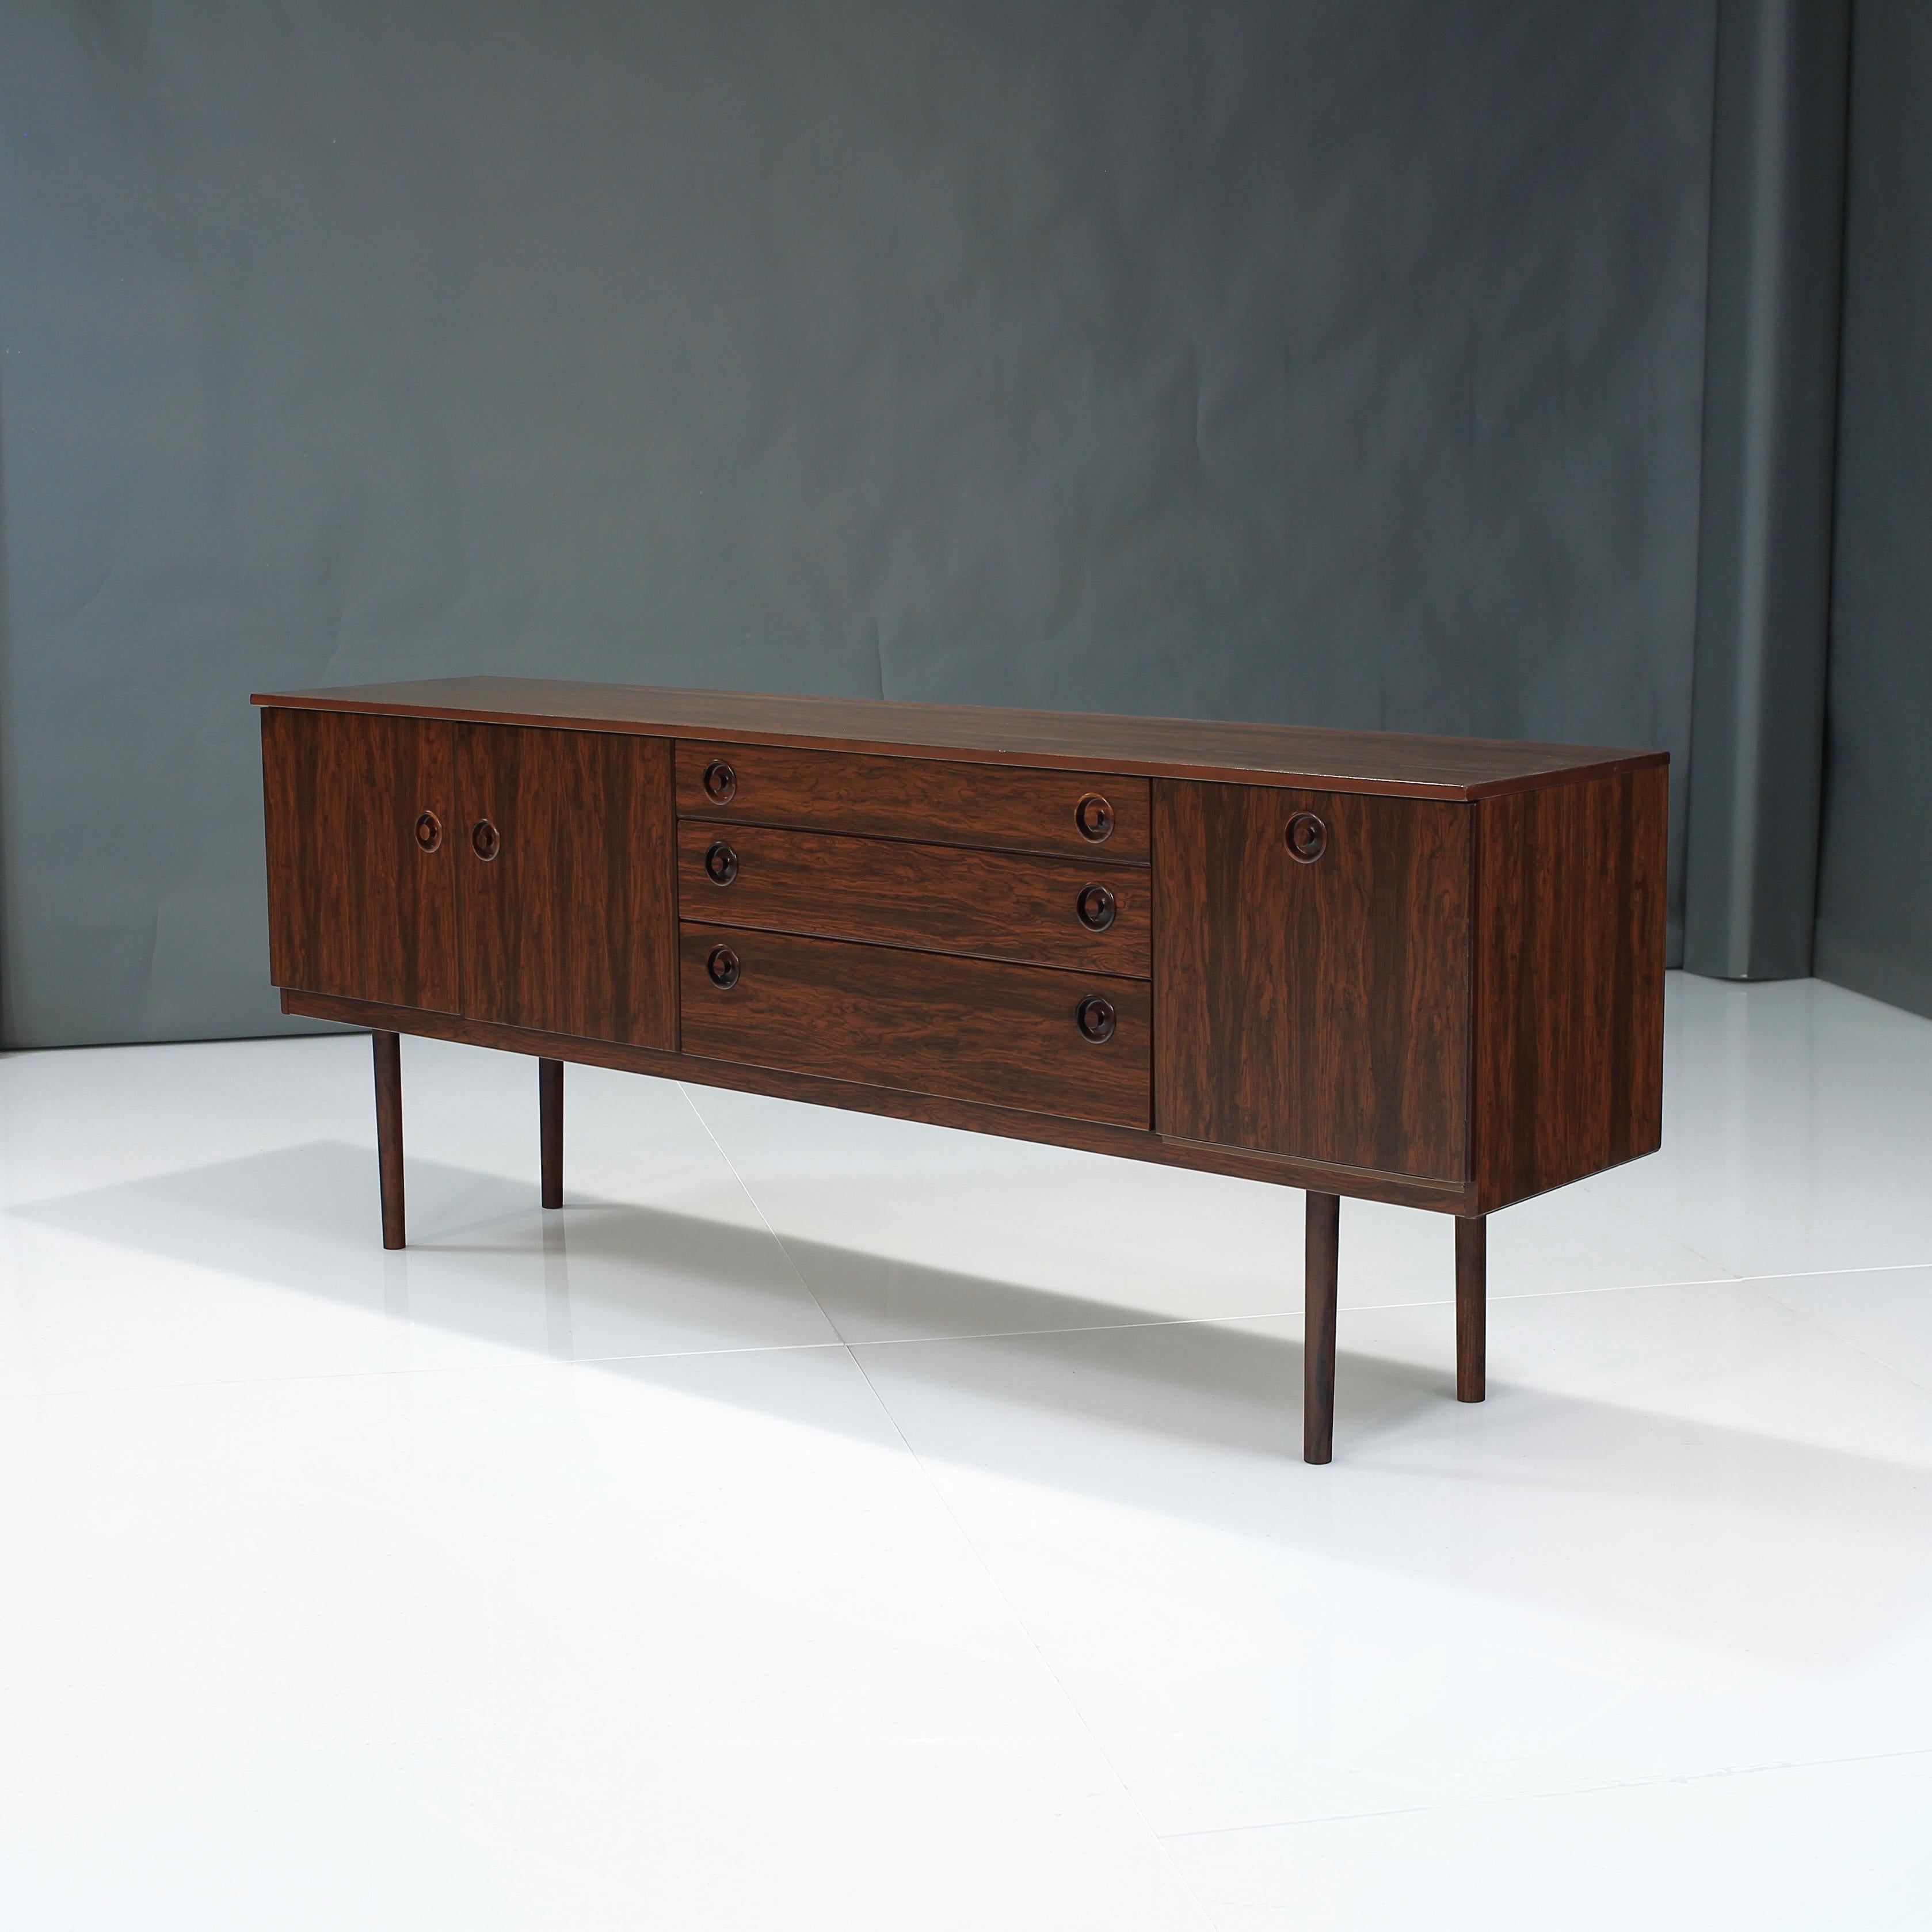 Presenting this long Rosewood credenza from England.

Offering ample storage and stunning visuals with the vivid rosewood grain. 

On the left, you have two cabinet doors with 1 open shelf for storage inside. In the middle you have newly